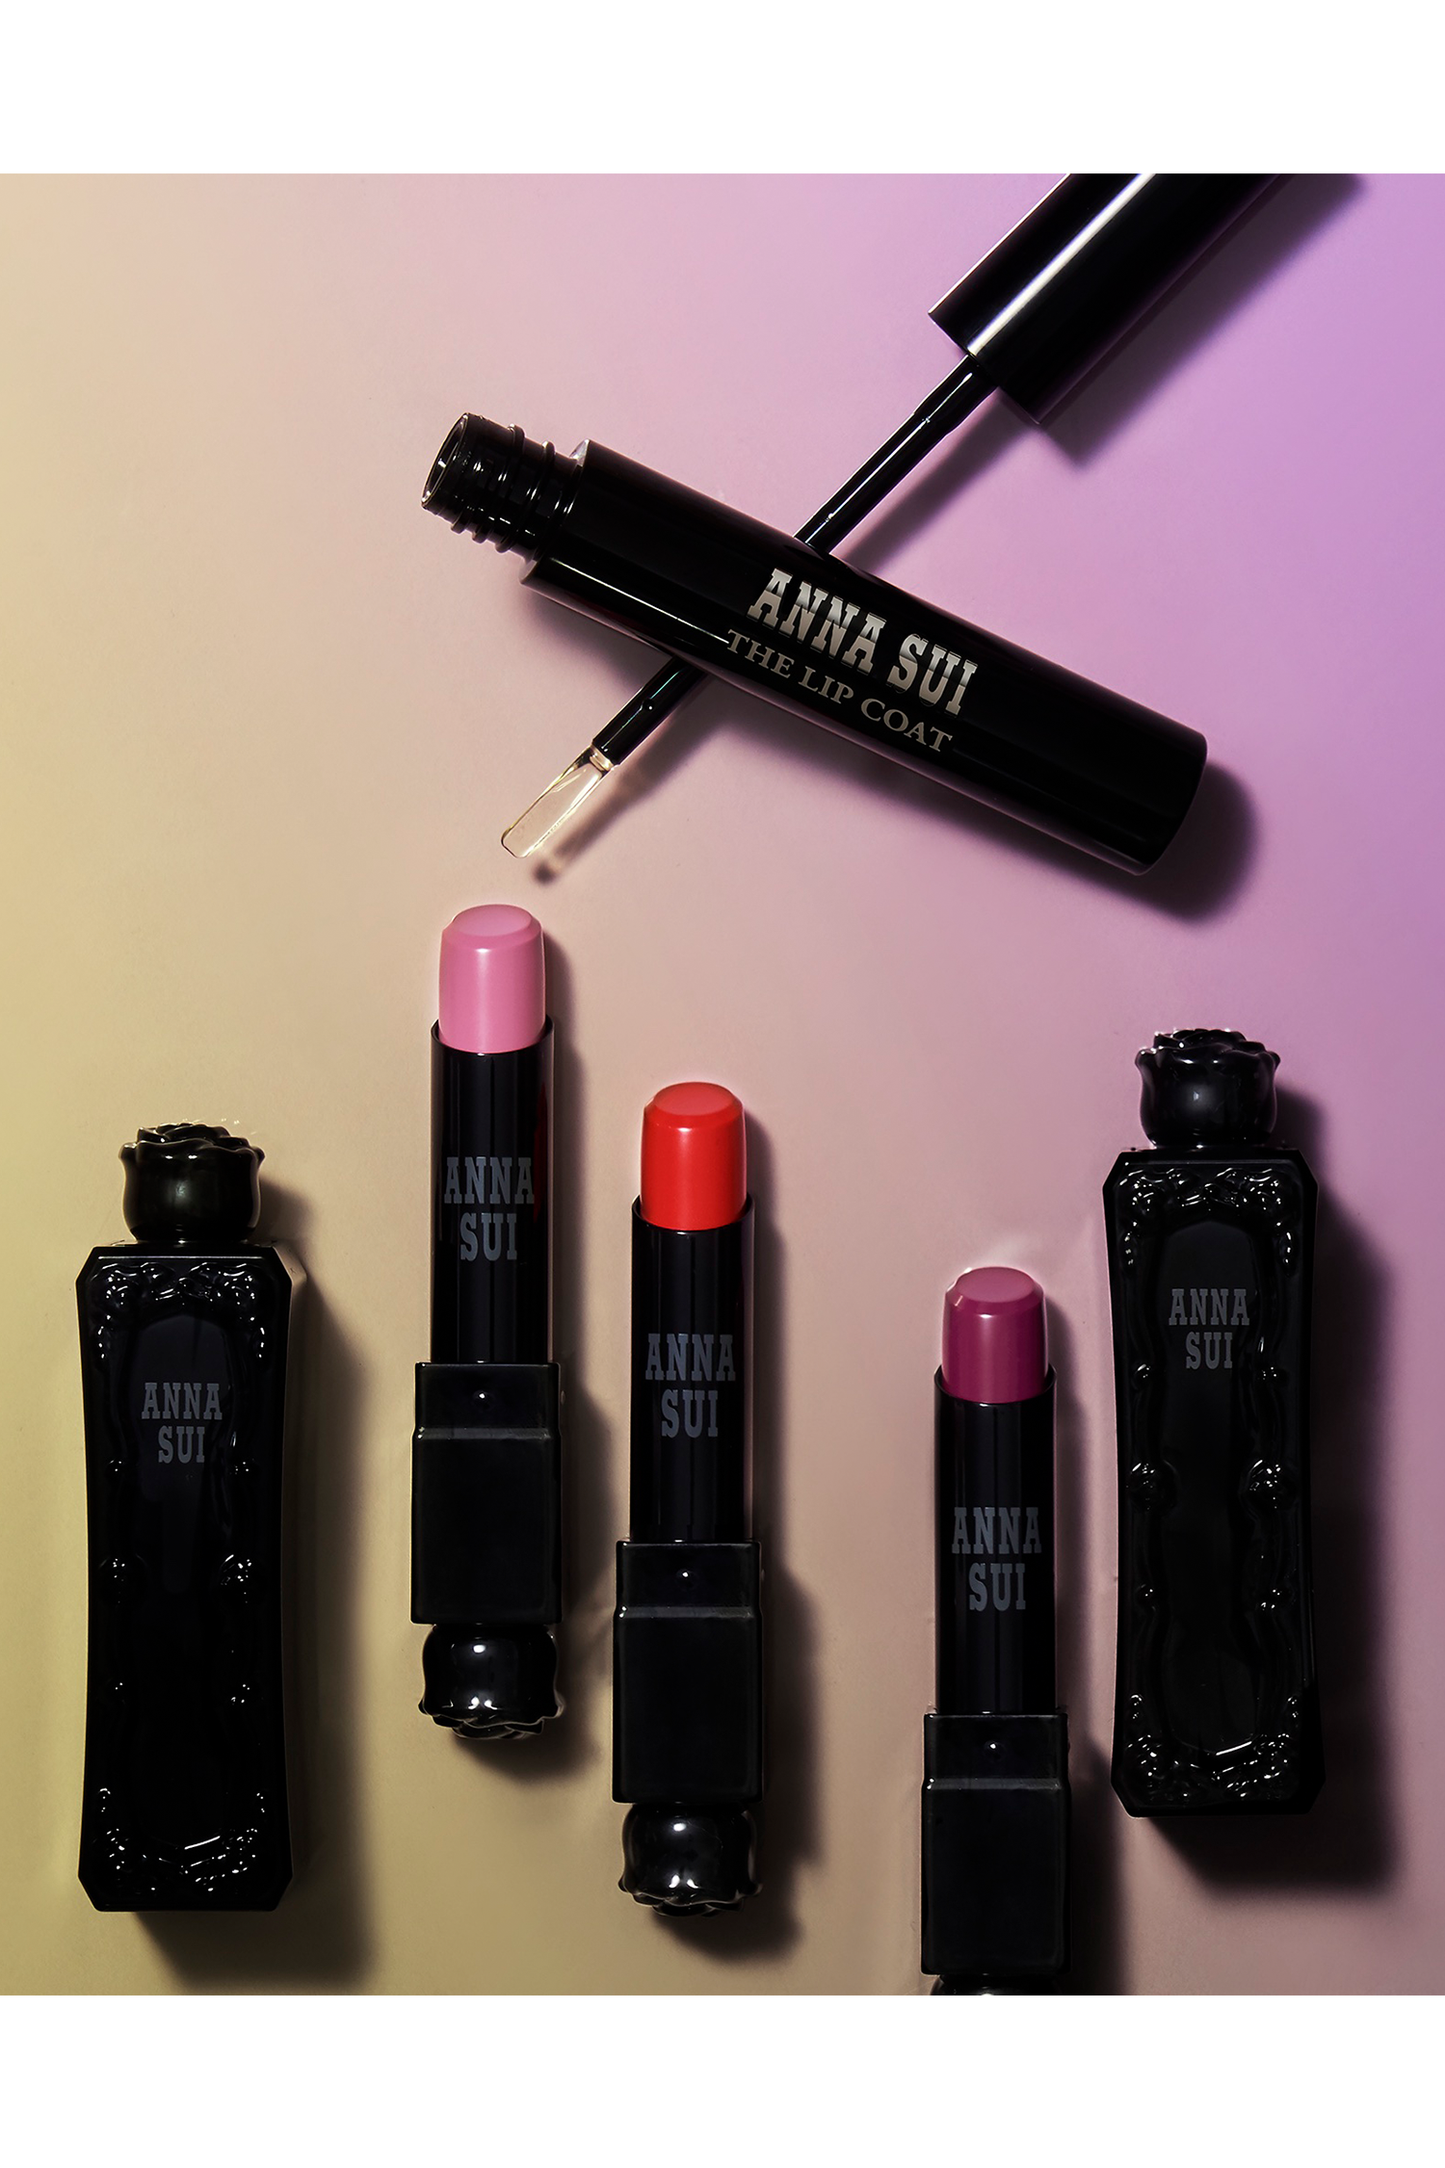 Presentation of Lip coat, in a black cylindrical container, with white label Anna Sui, the Lip Coat 